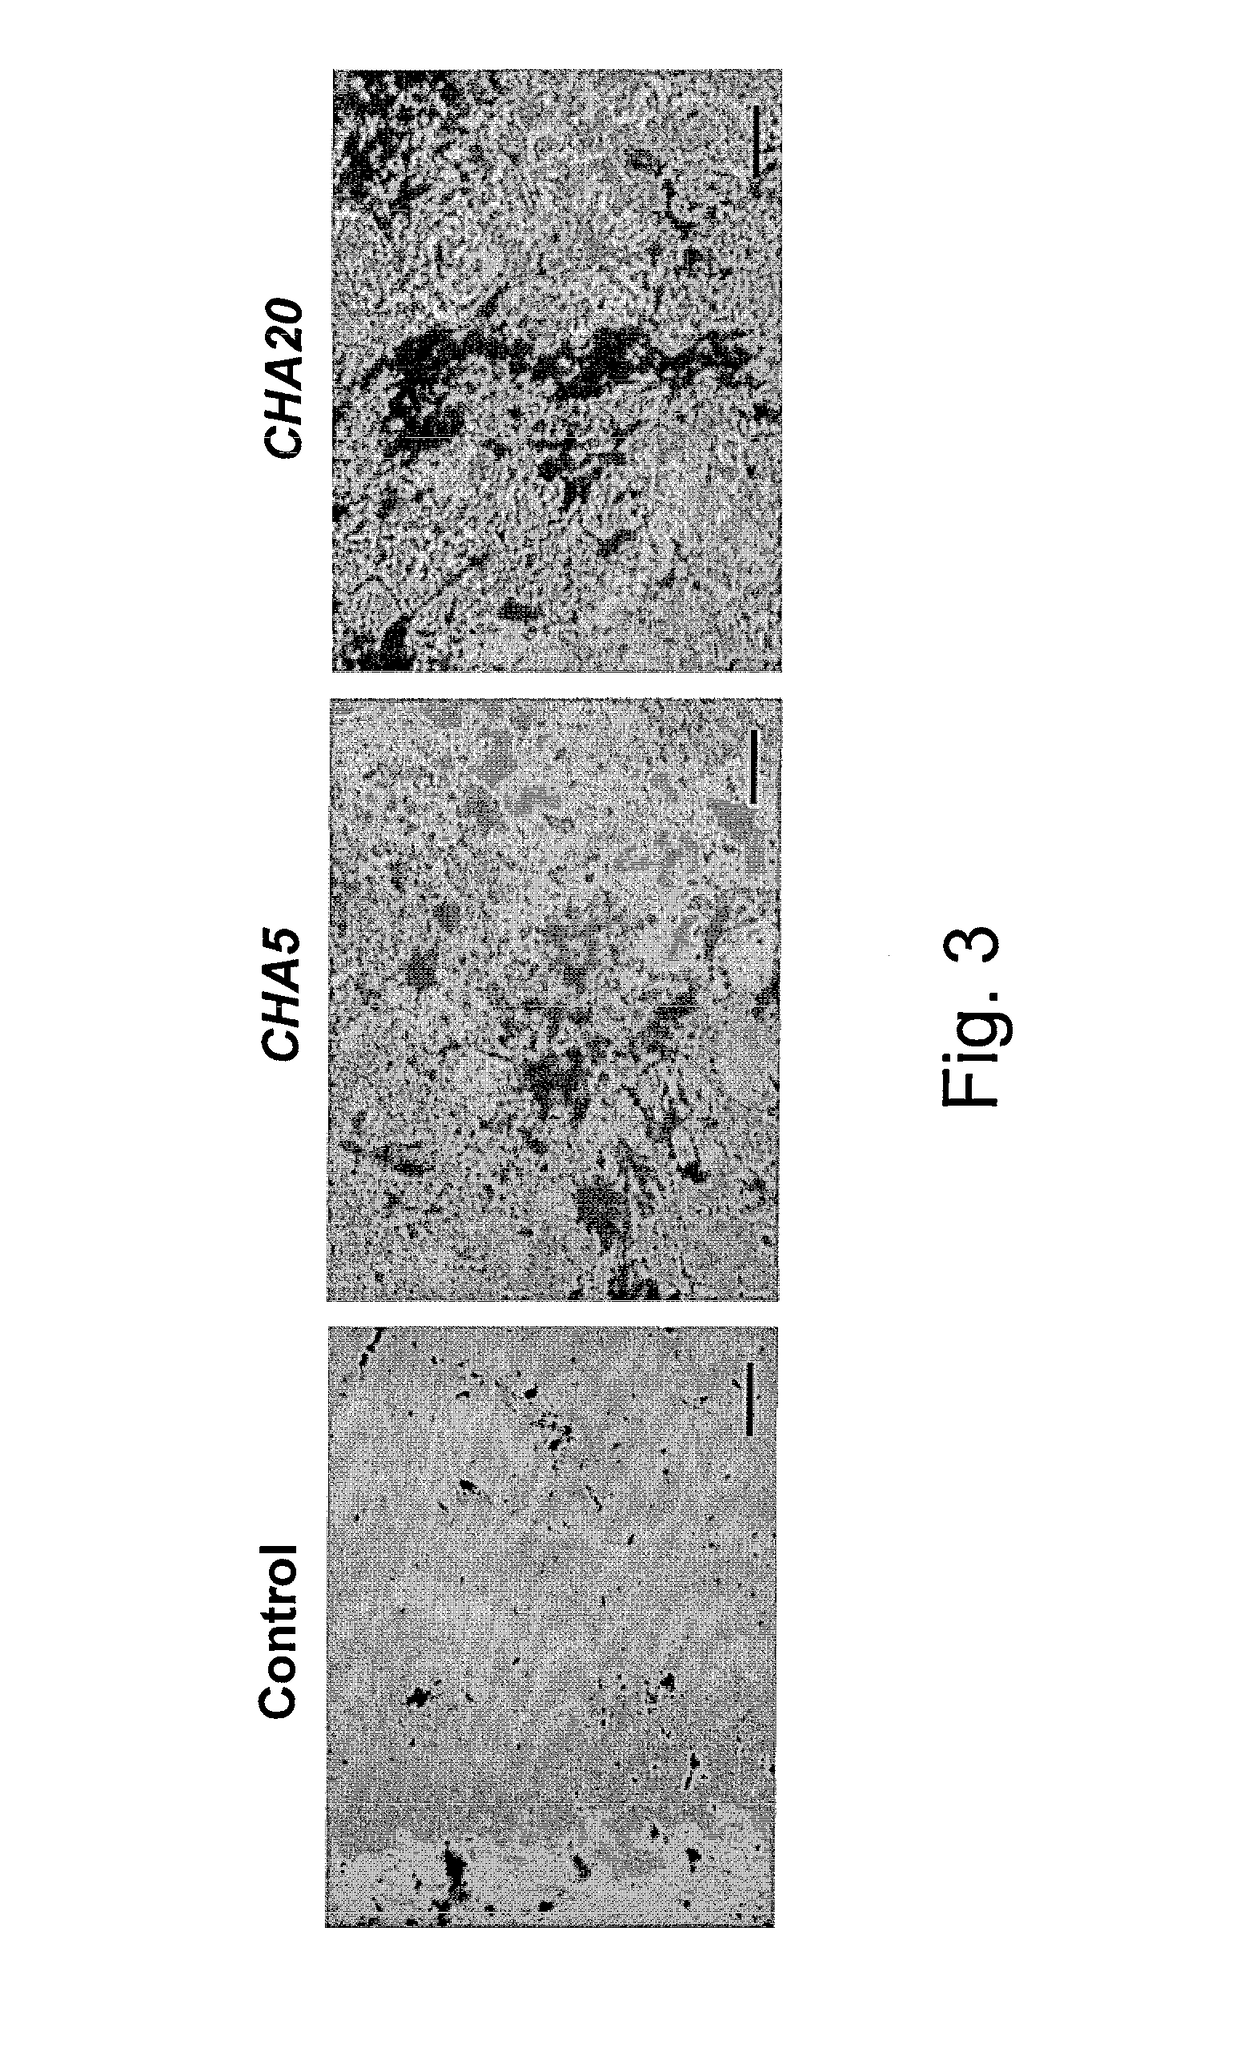 Method for preserving proliferation and differentiation potential of mesenchymal stem cells